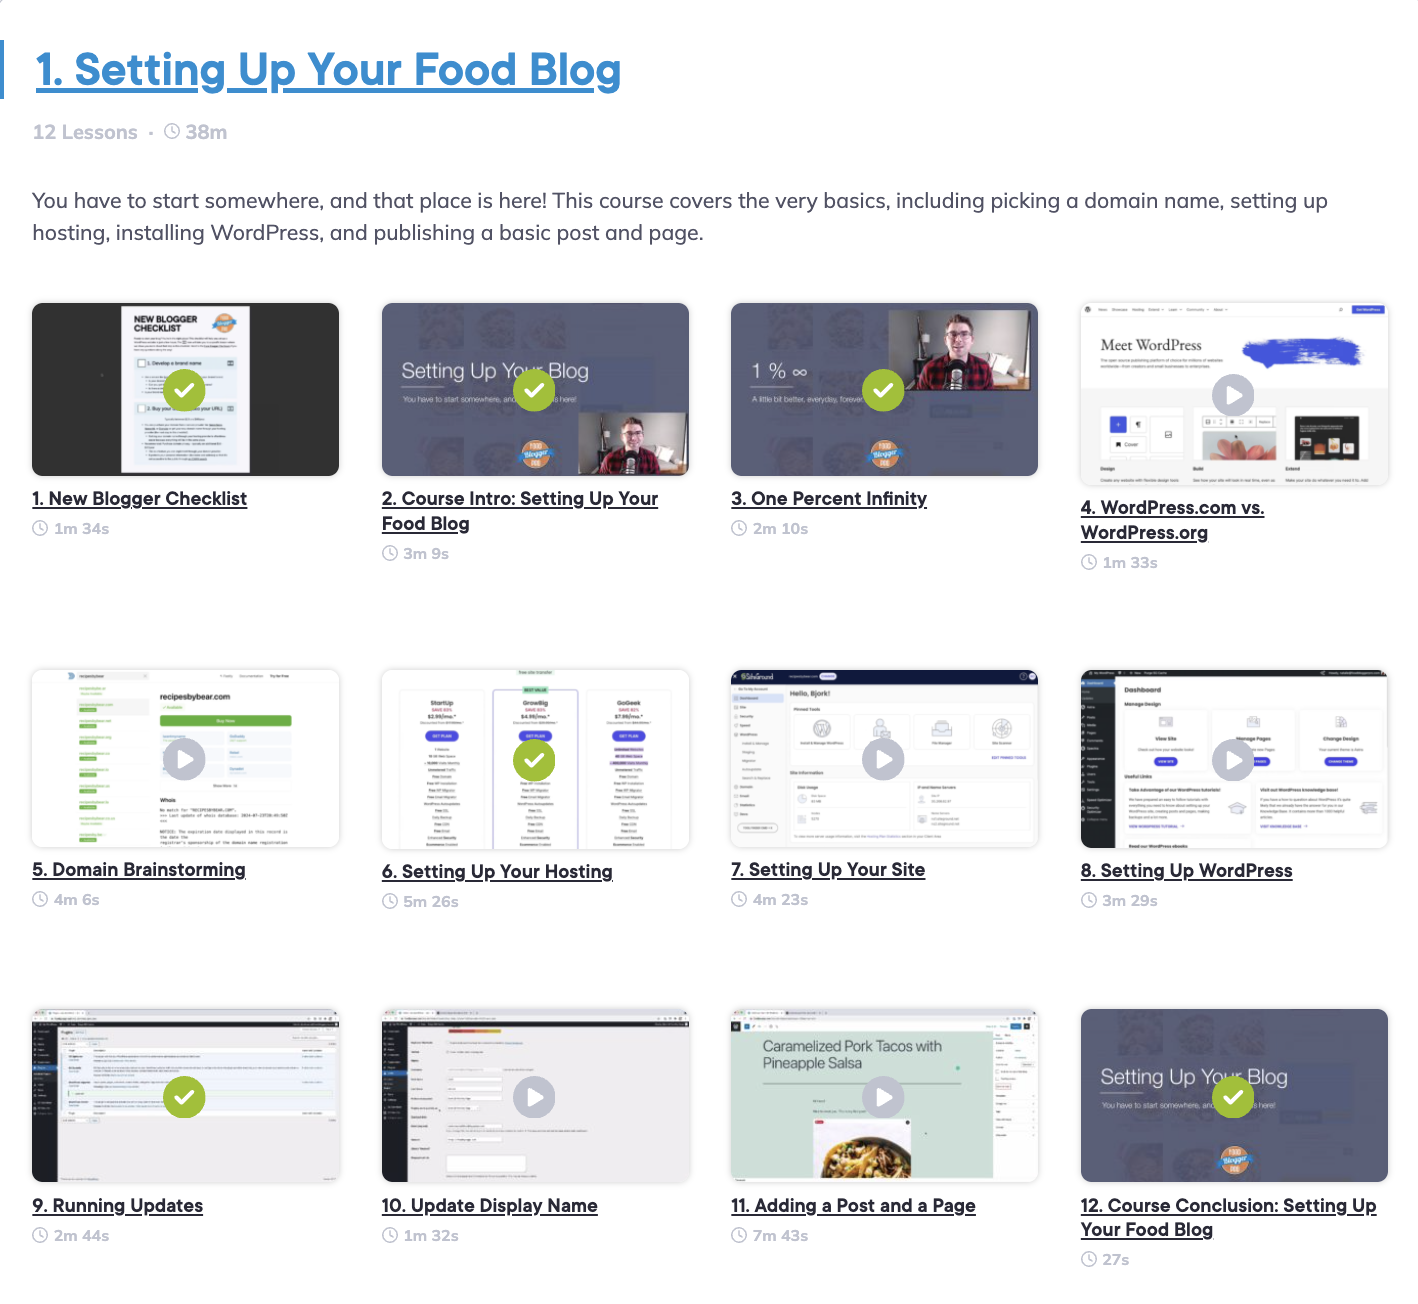 Screenshot from the Setting up Your Food Blog course which shows all the lessons.